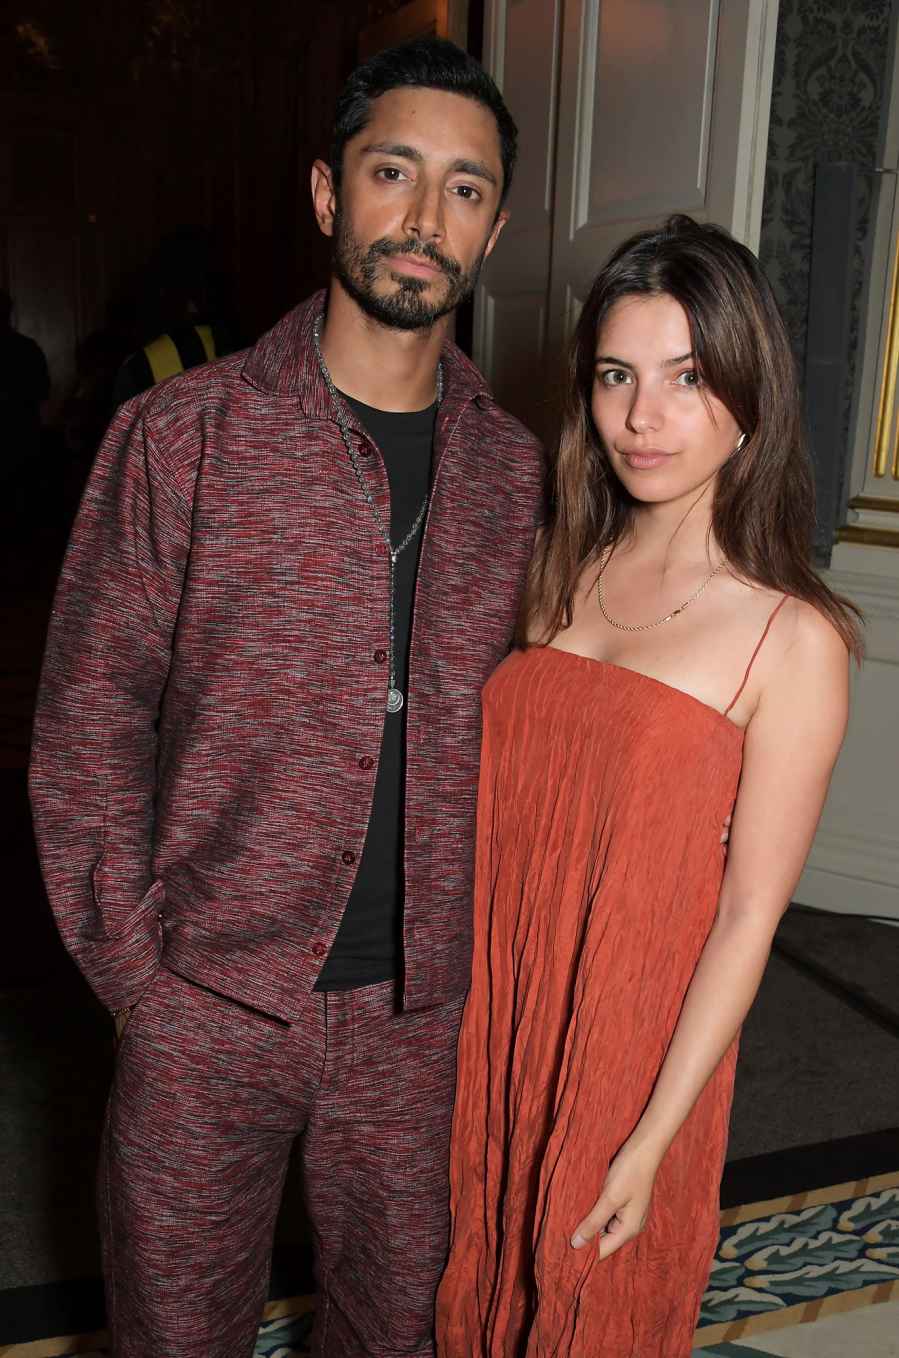 Riz Ahmed and Fatima Farheen Mirza Celebrities Who Fell in Love With Non-Famous People